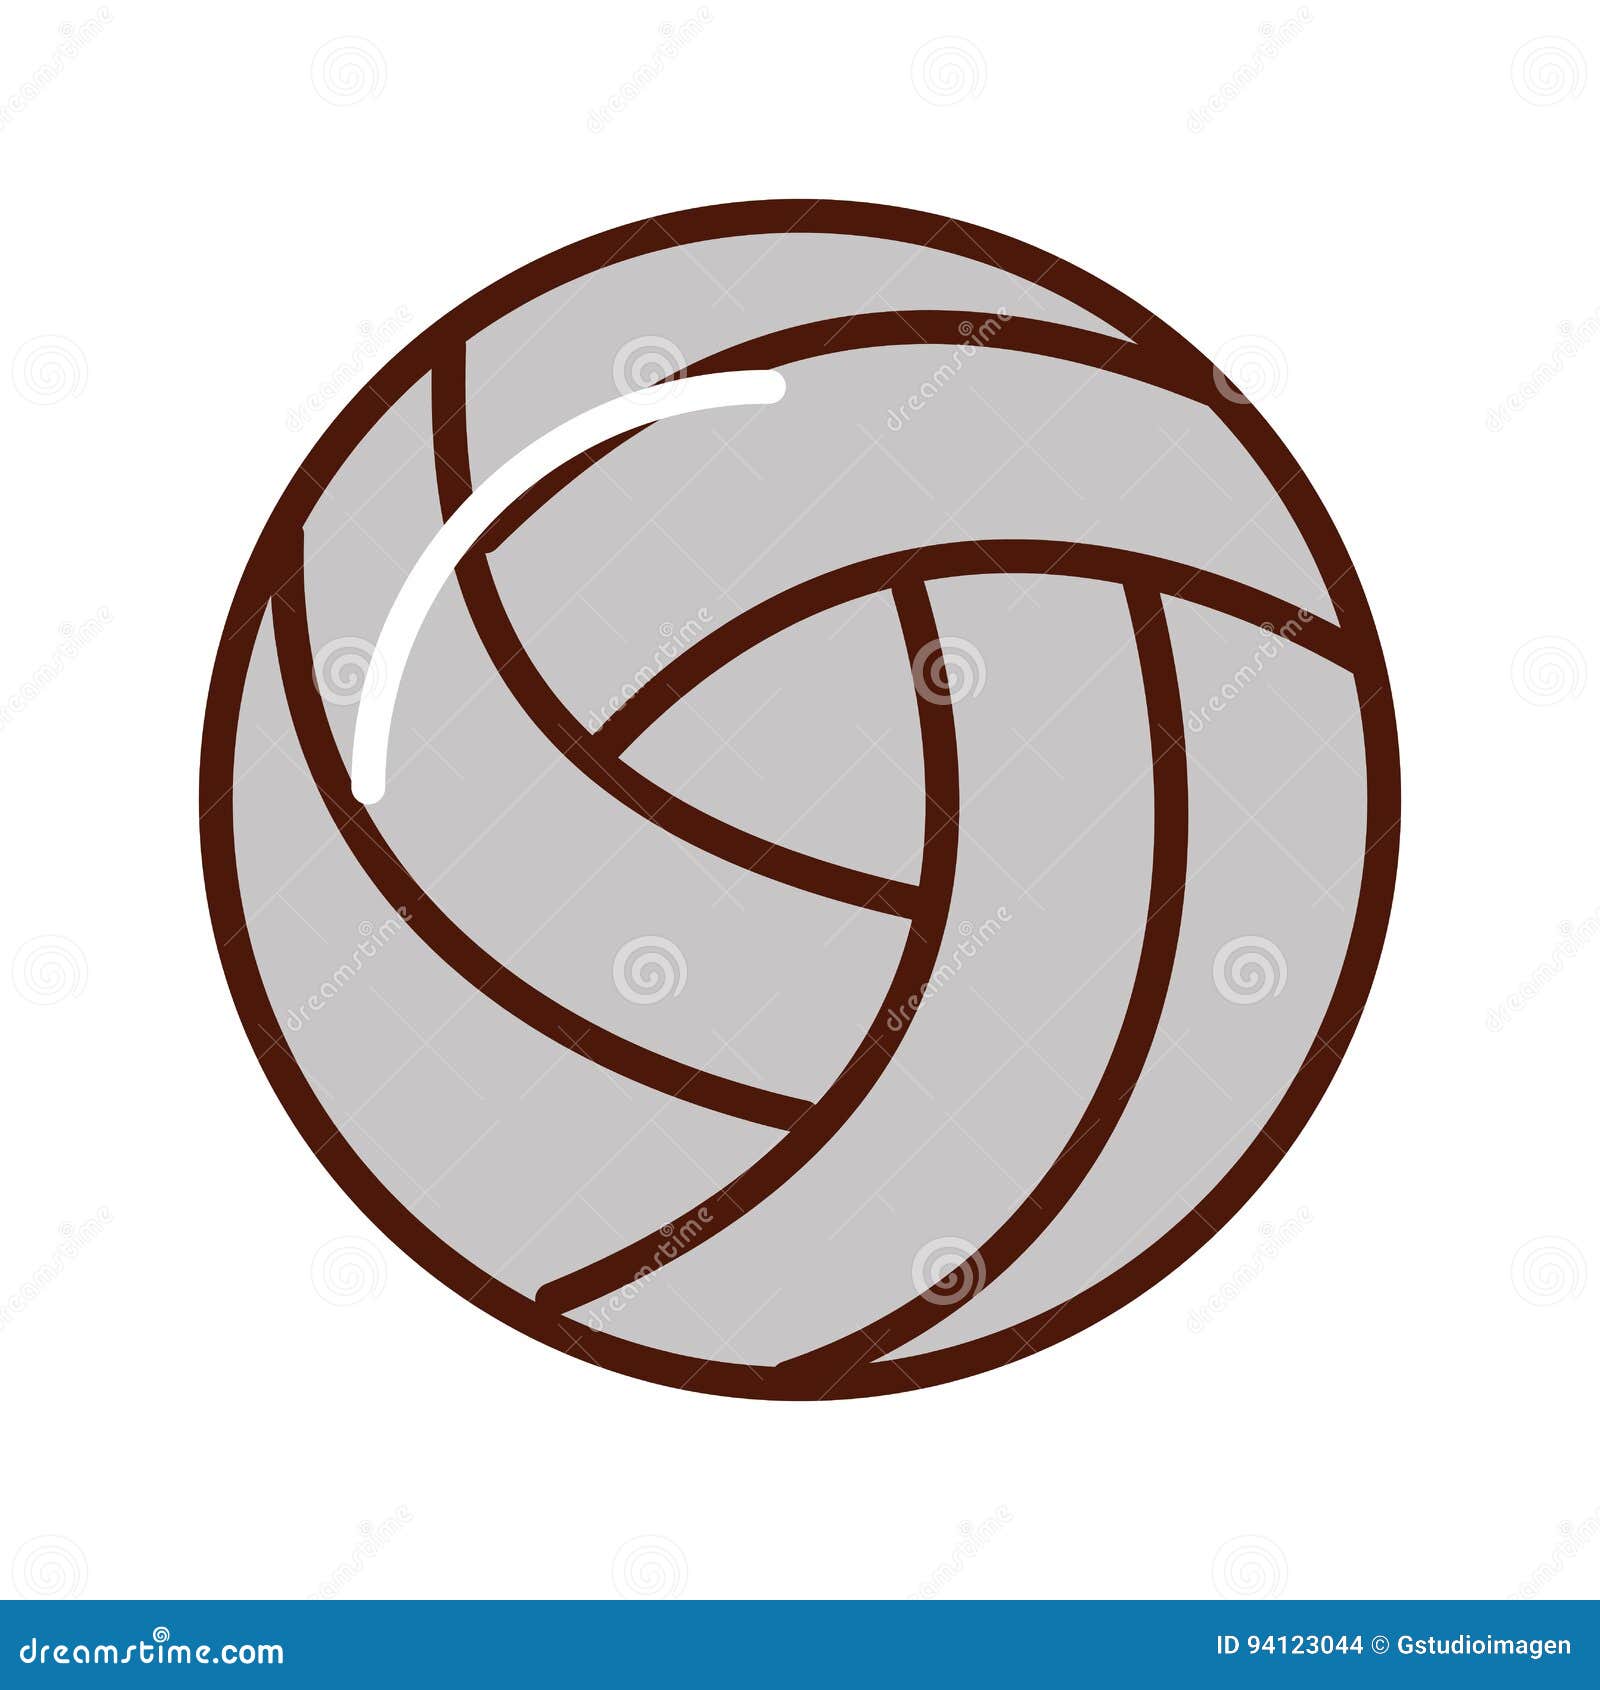 Brightly Volley Ball Cartoon Stock Vector - Illustration of round ...